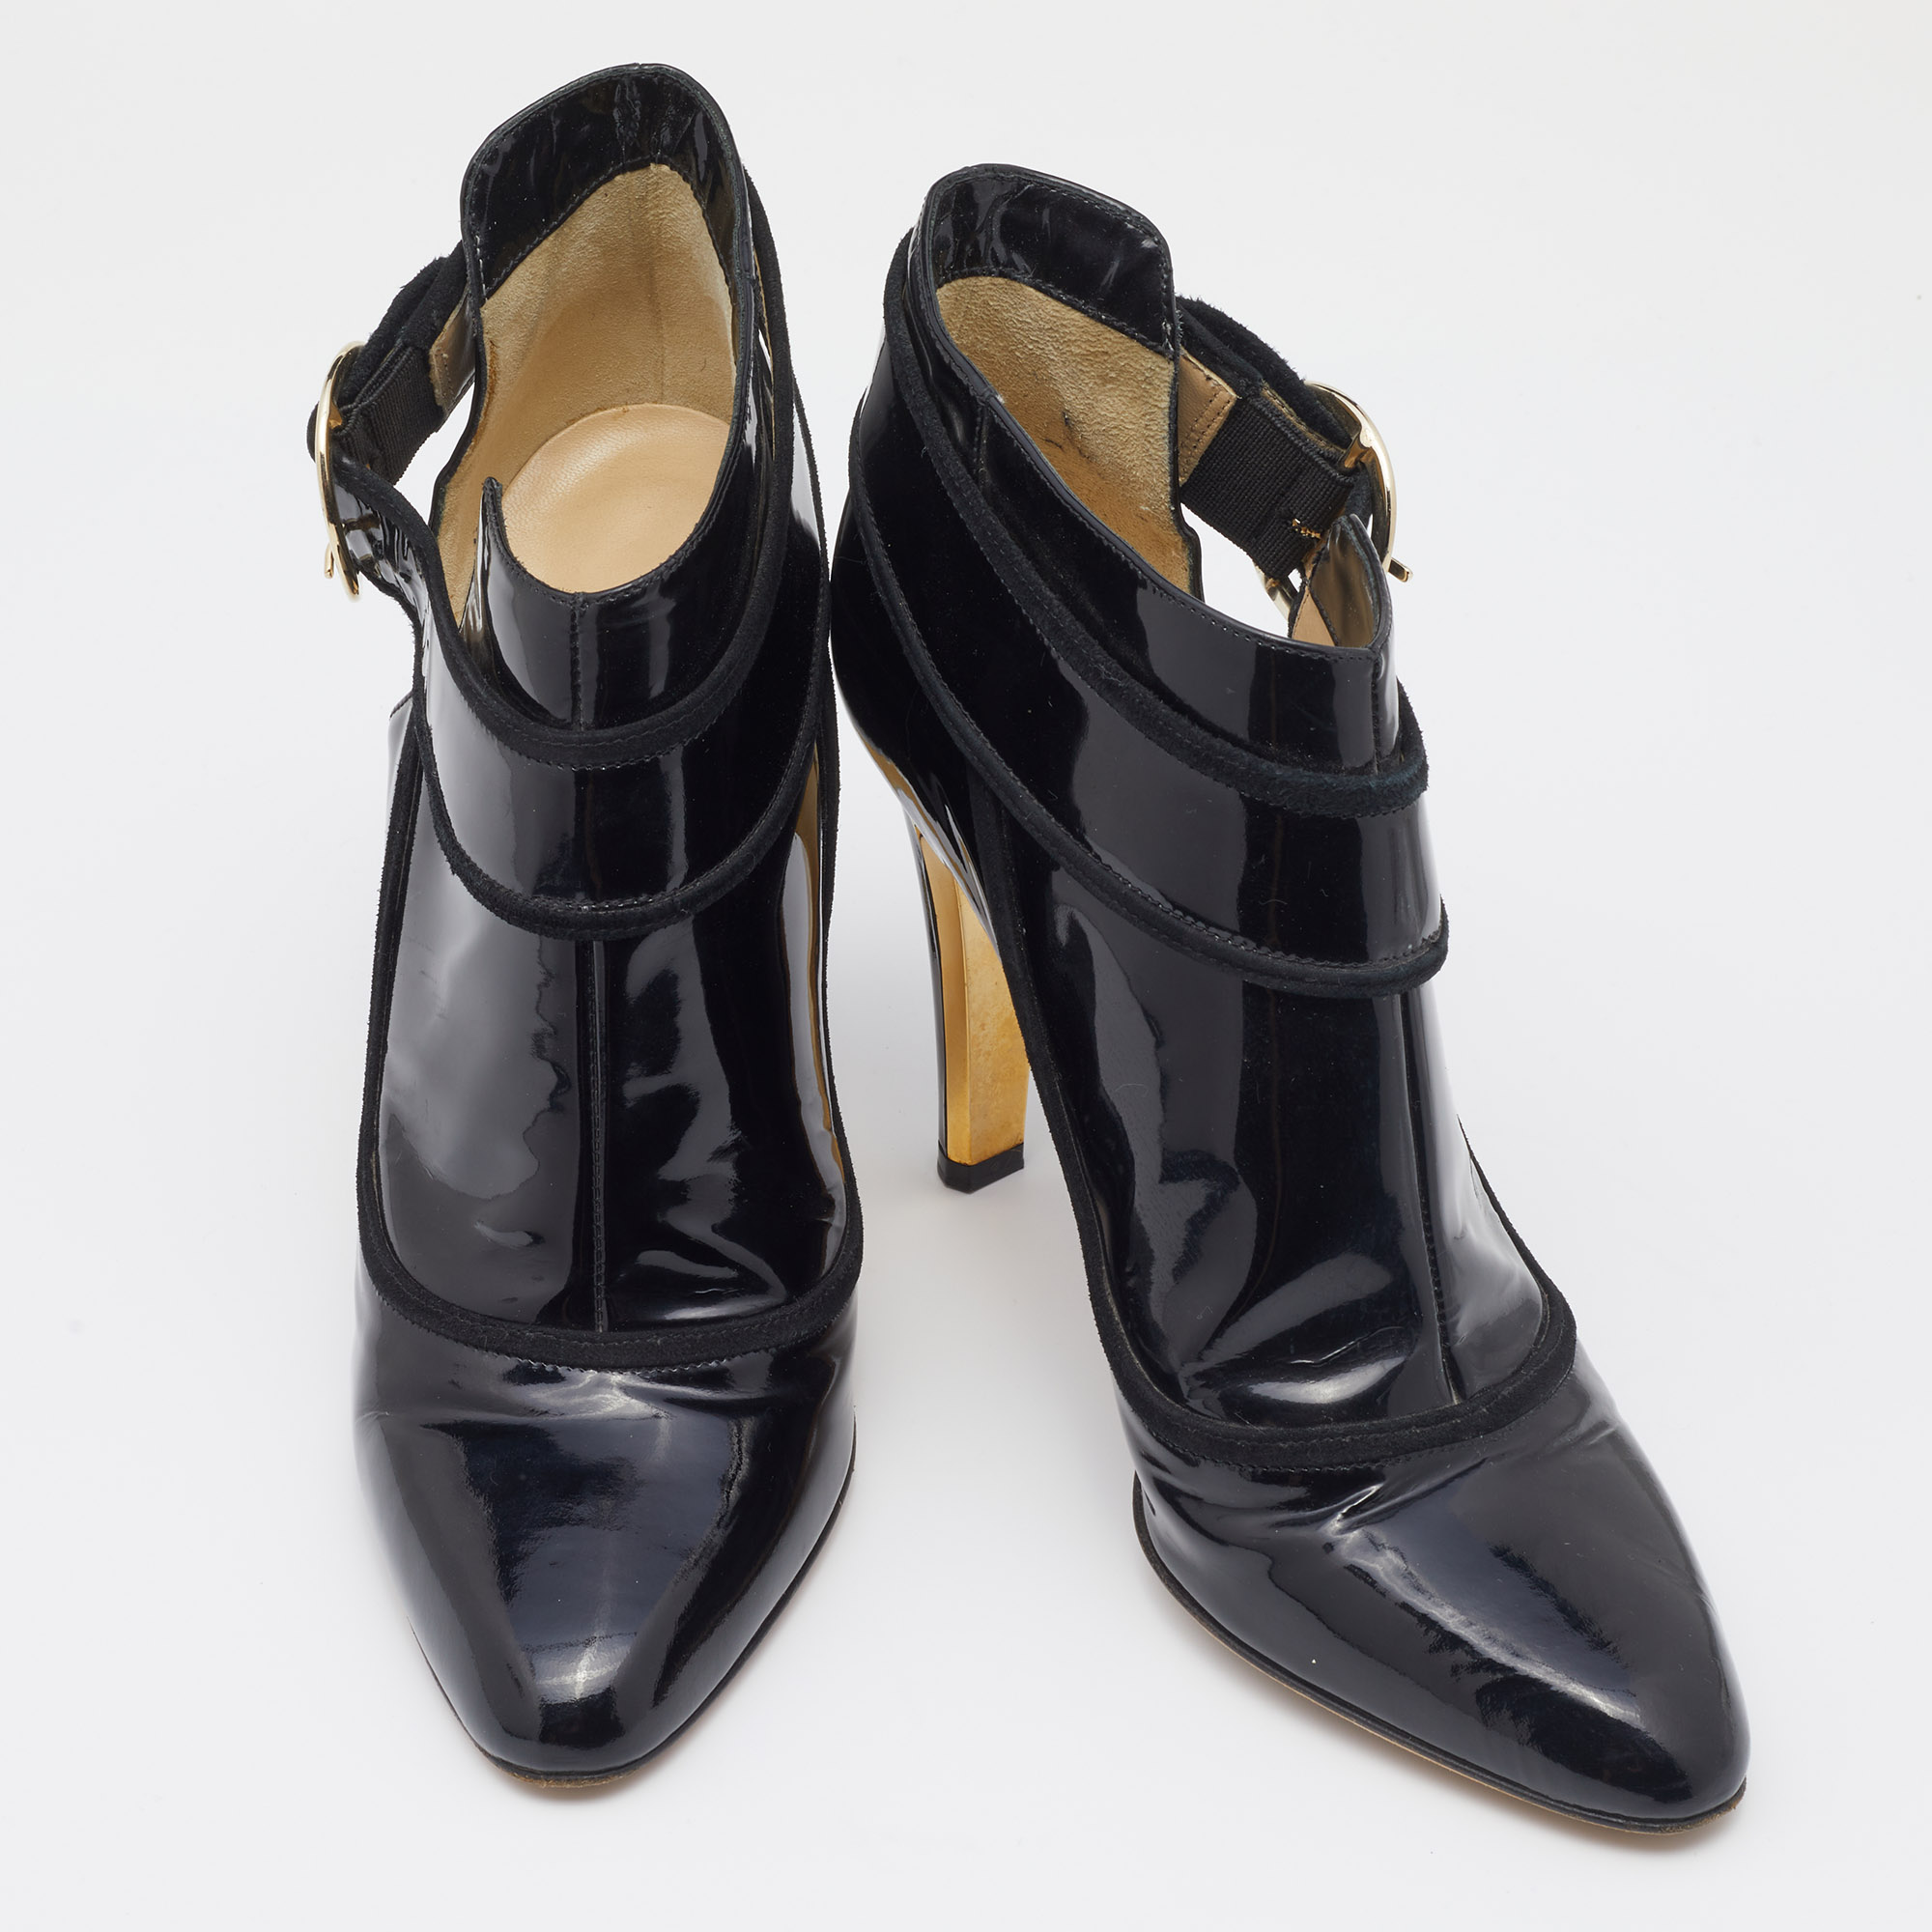 Jimmy Choo Black Patent Leather Chicago Ankle Boots Size 40